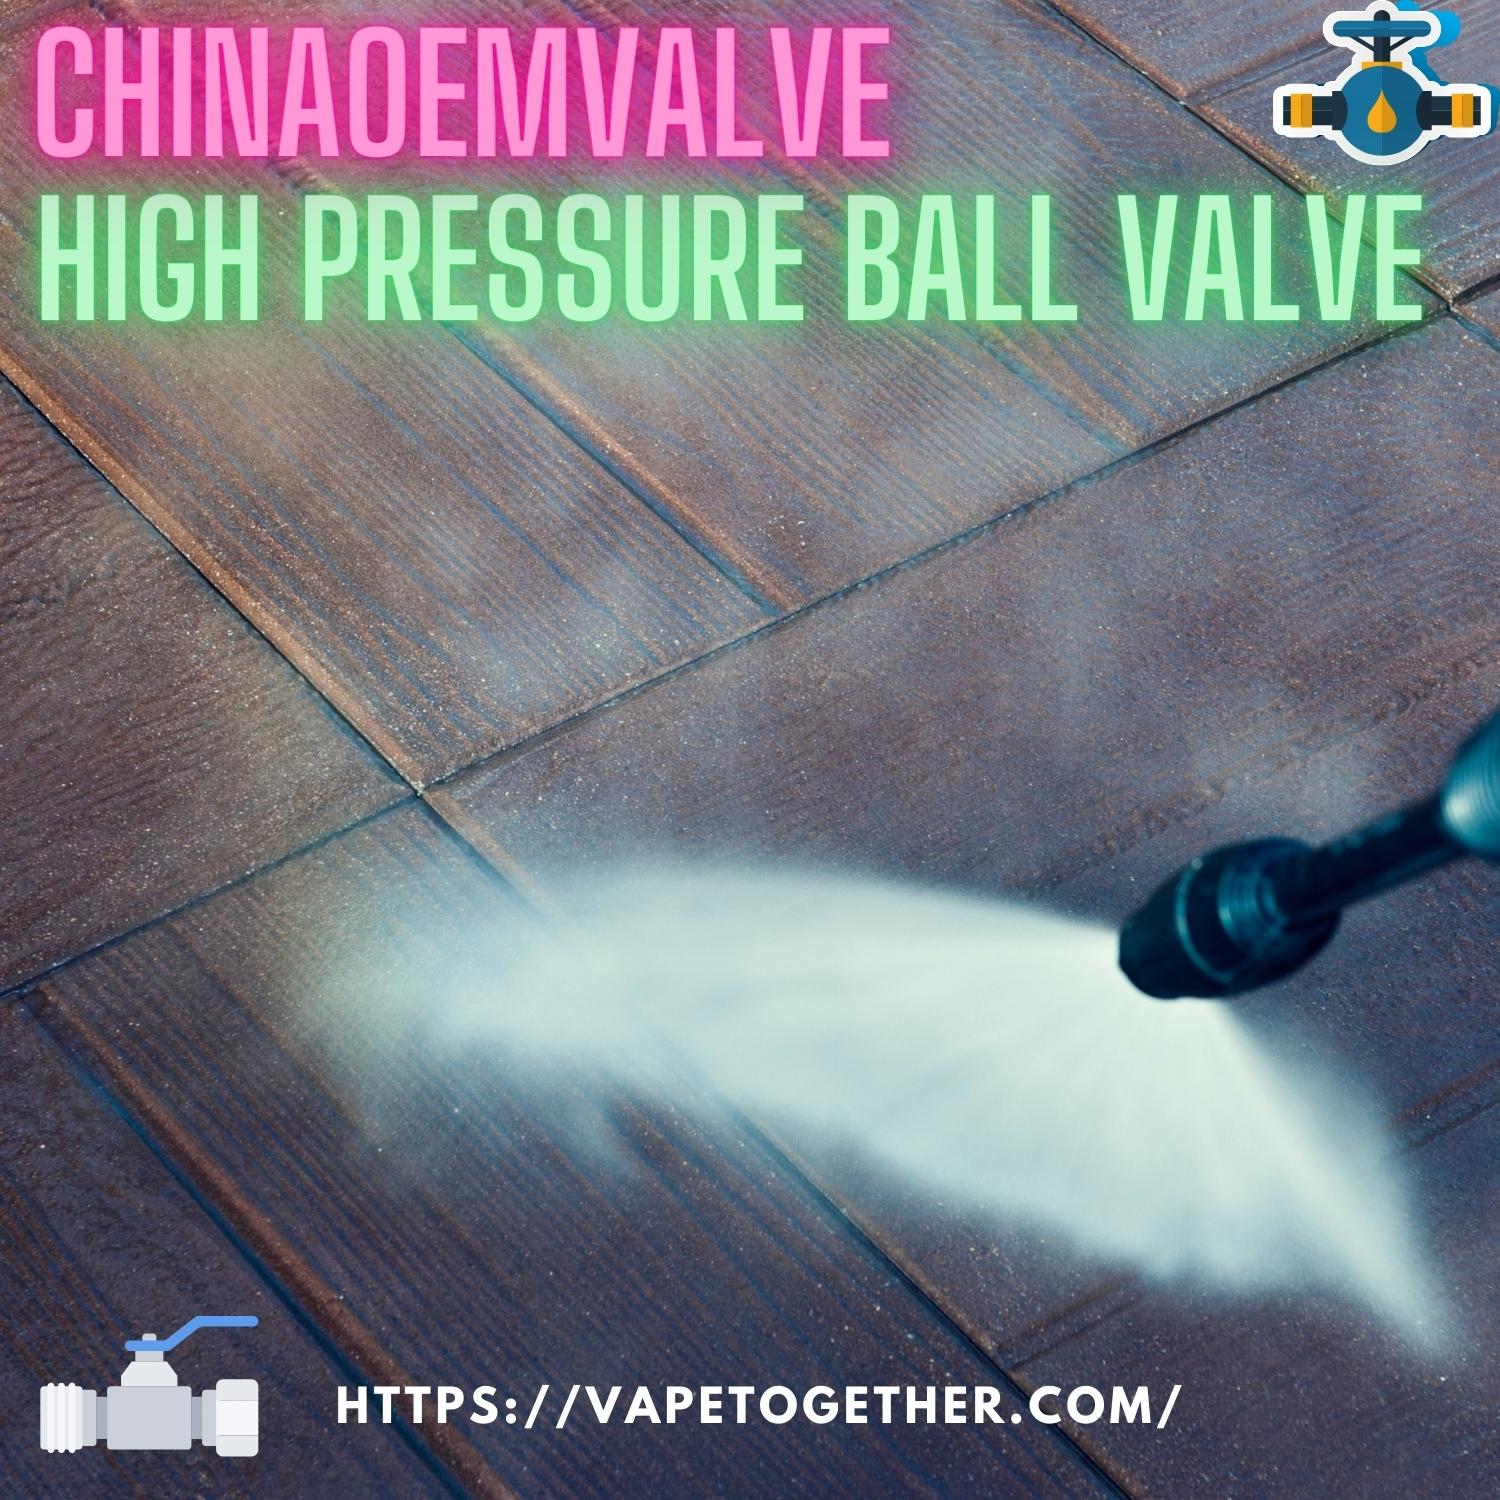 What are the key advantages of using a high-pressure ball valve in industrial applications, and how does it differ from other types of valves